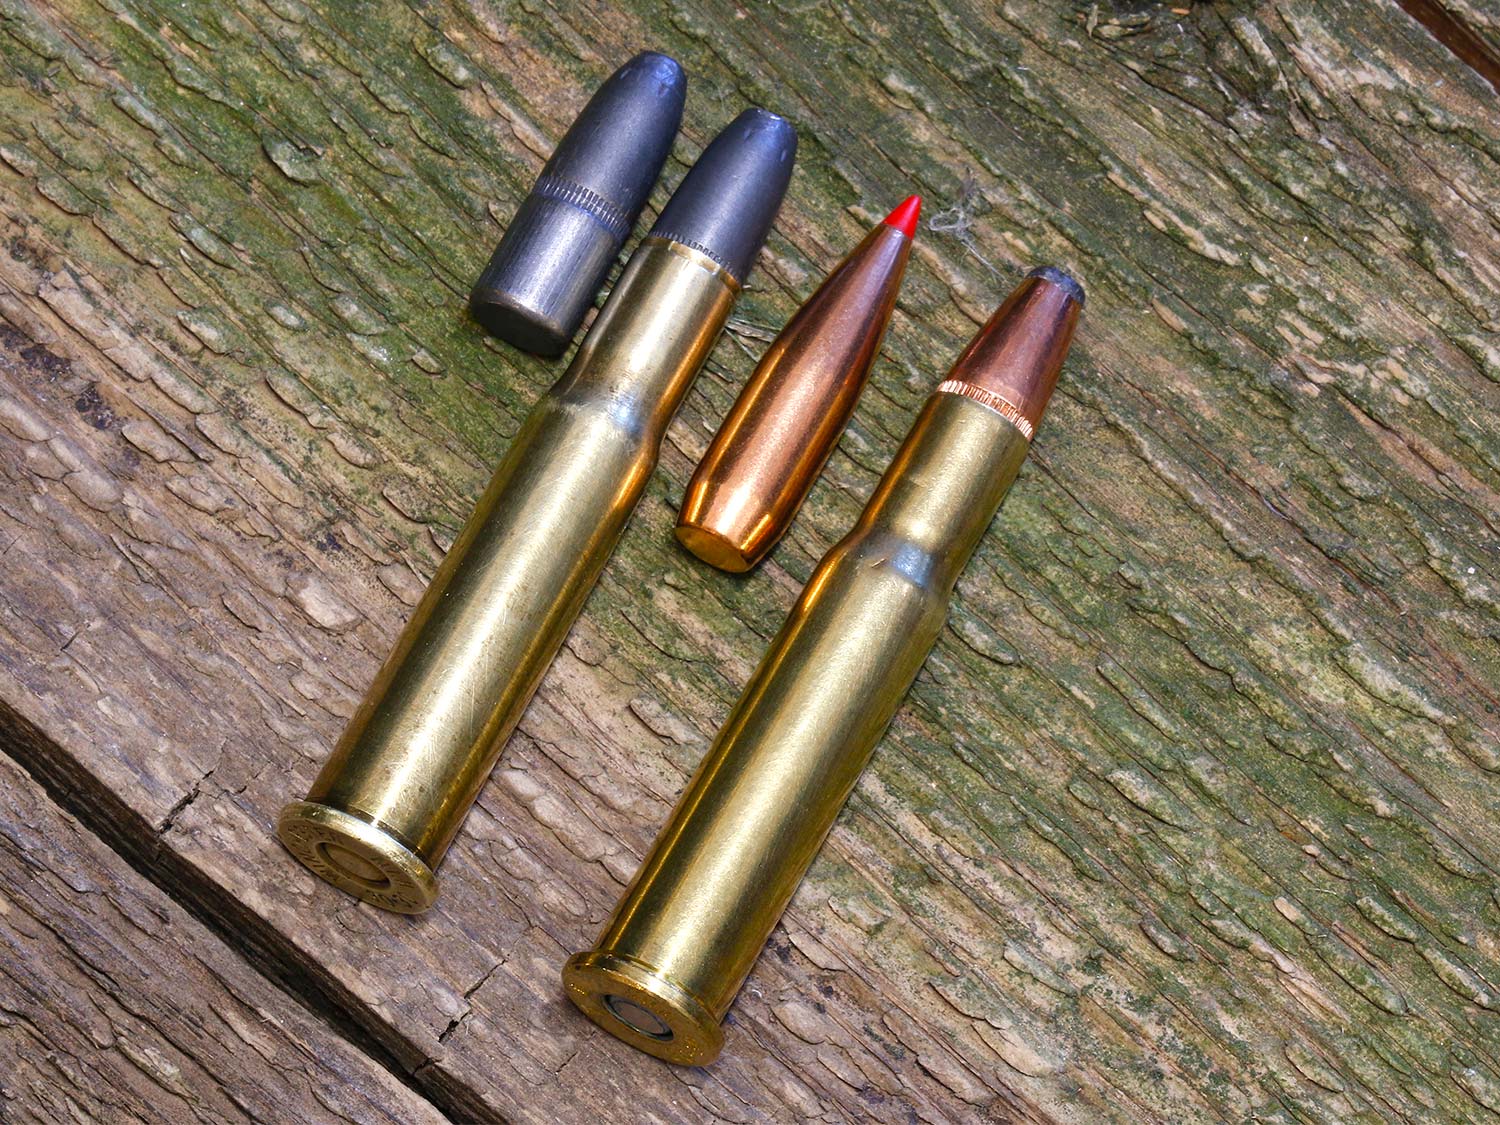 Rifle ammo and tips.